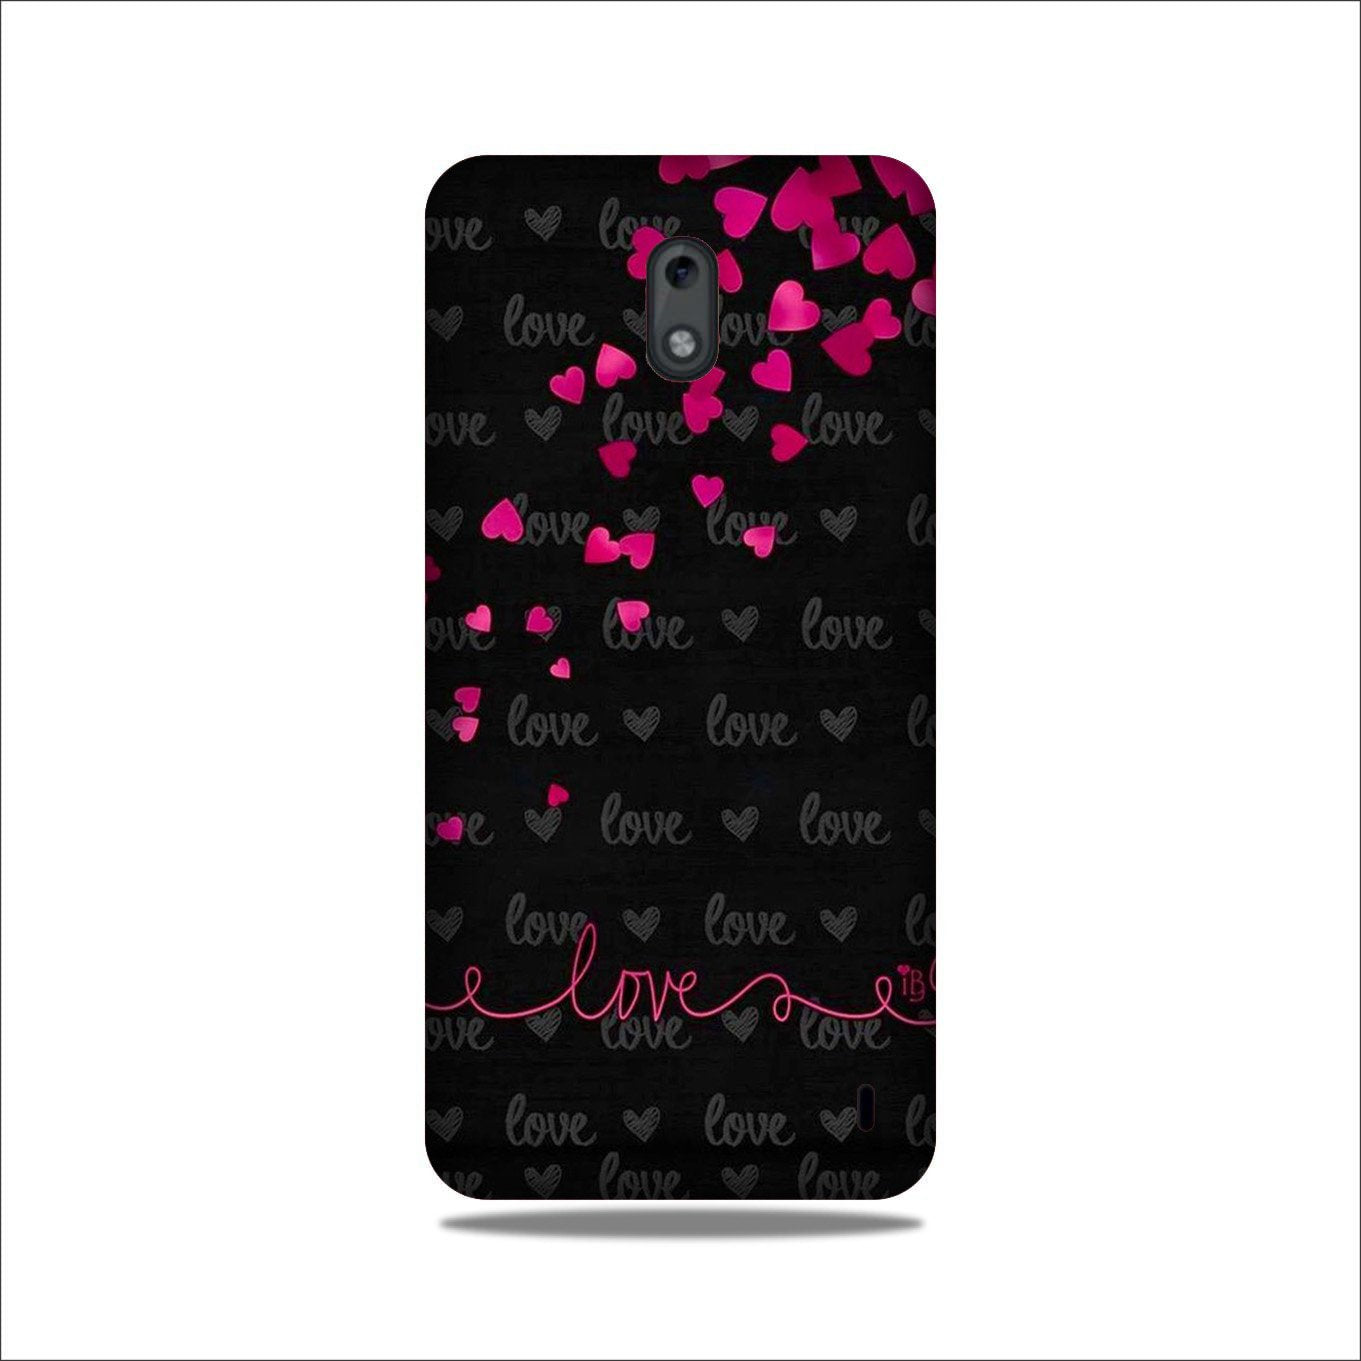 Love in Air Case for Nokia 2